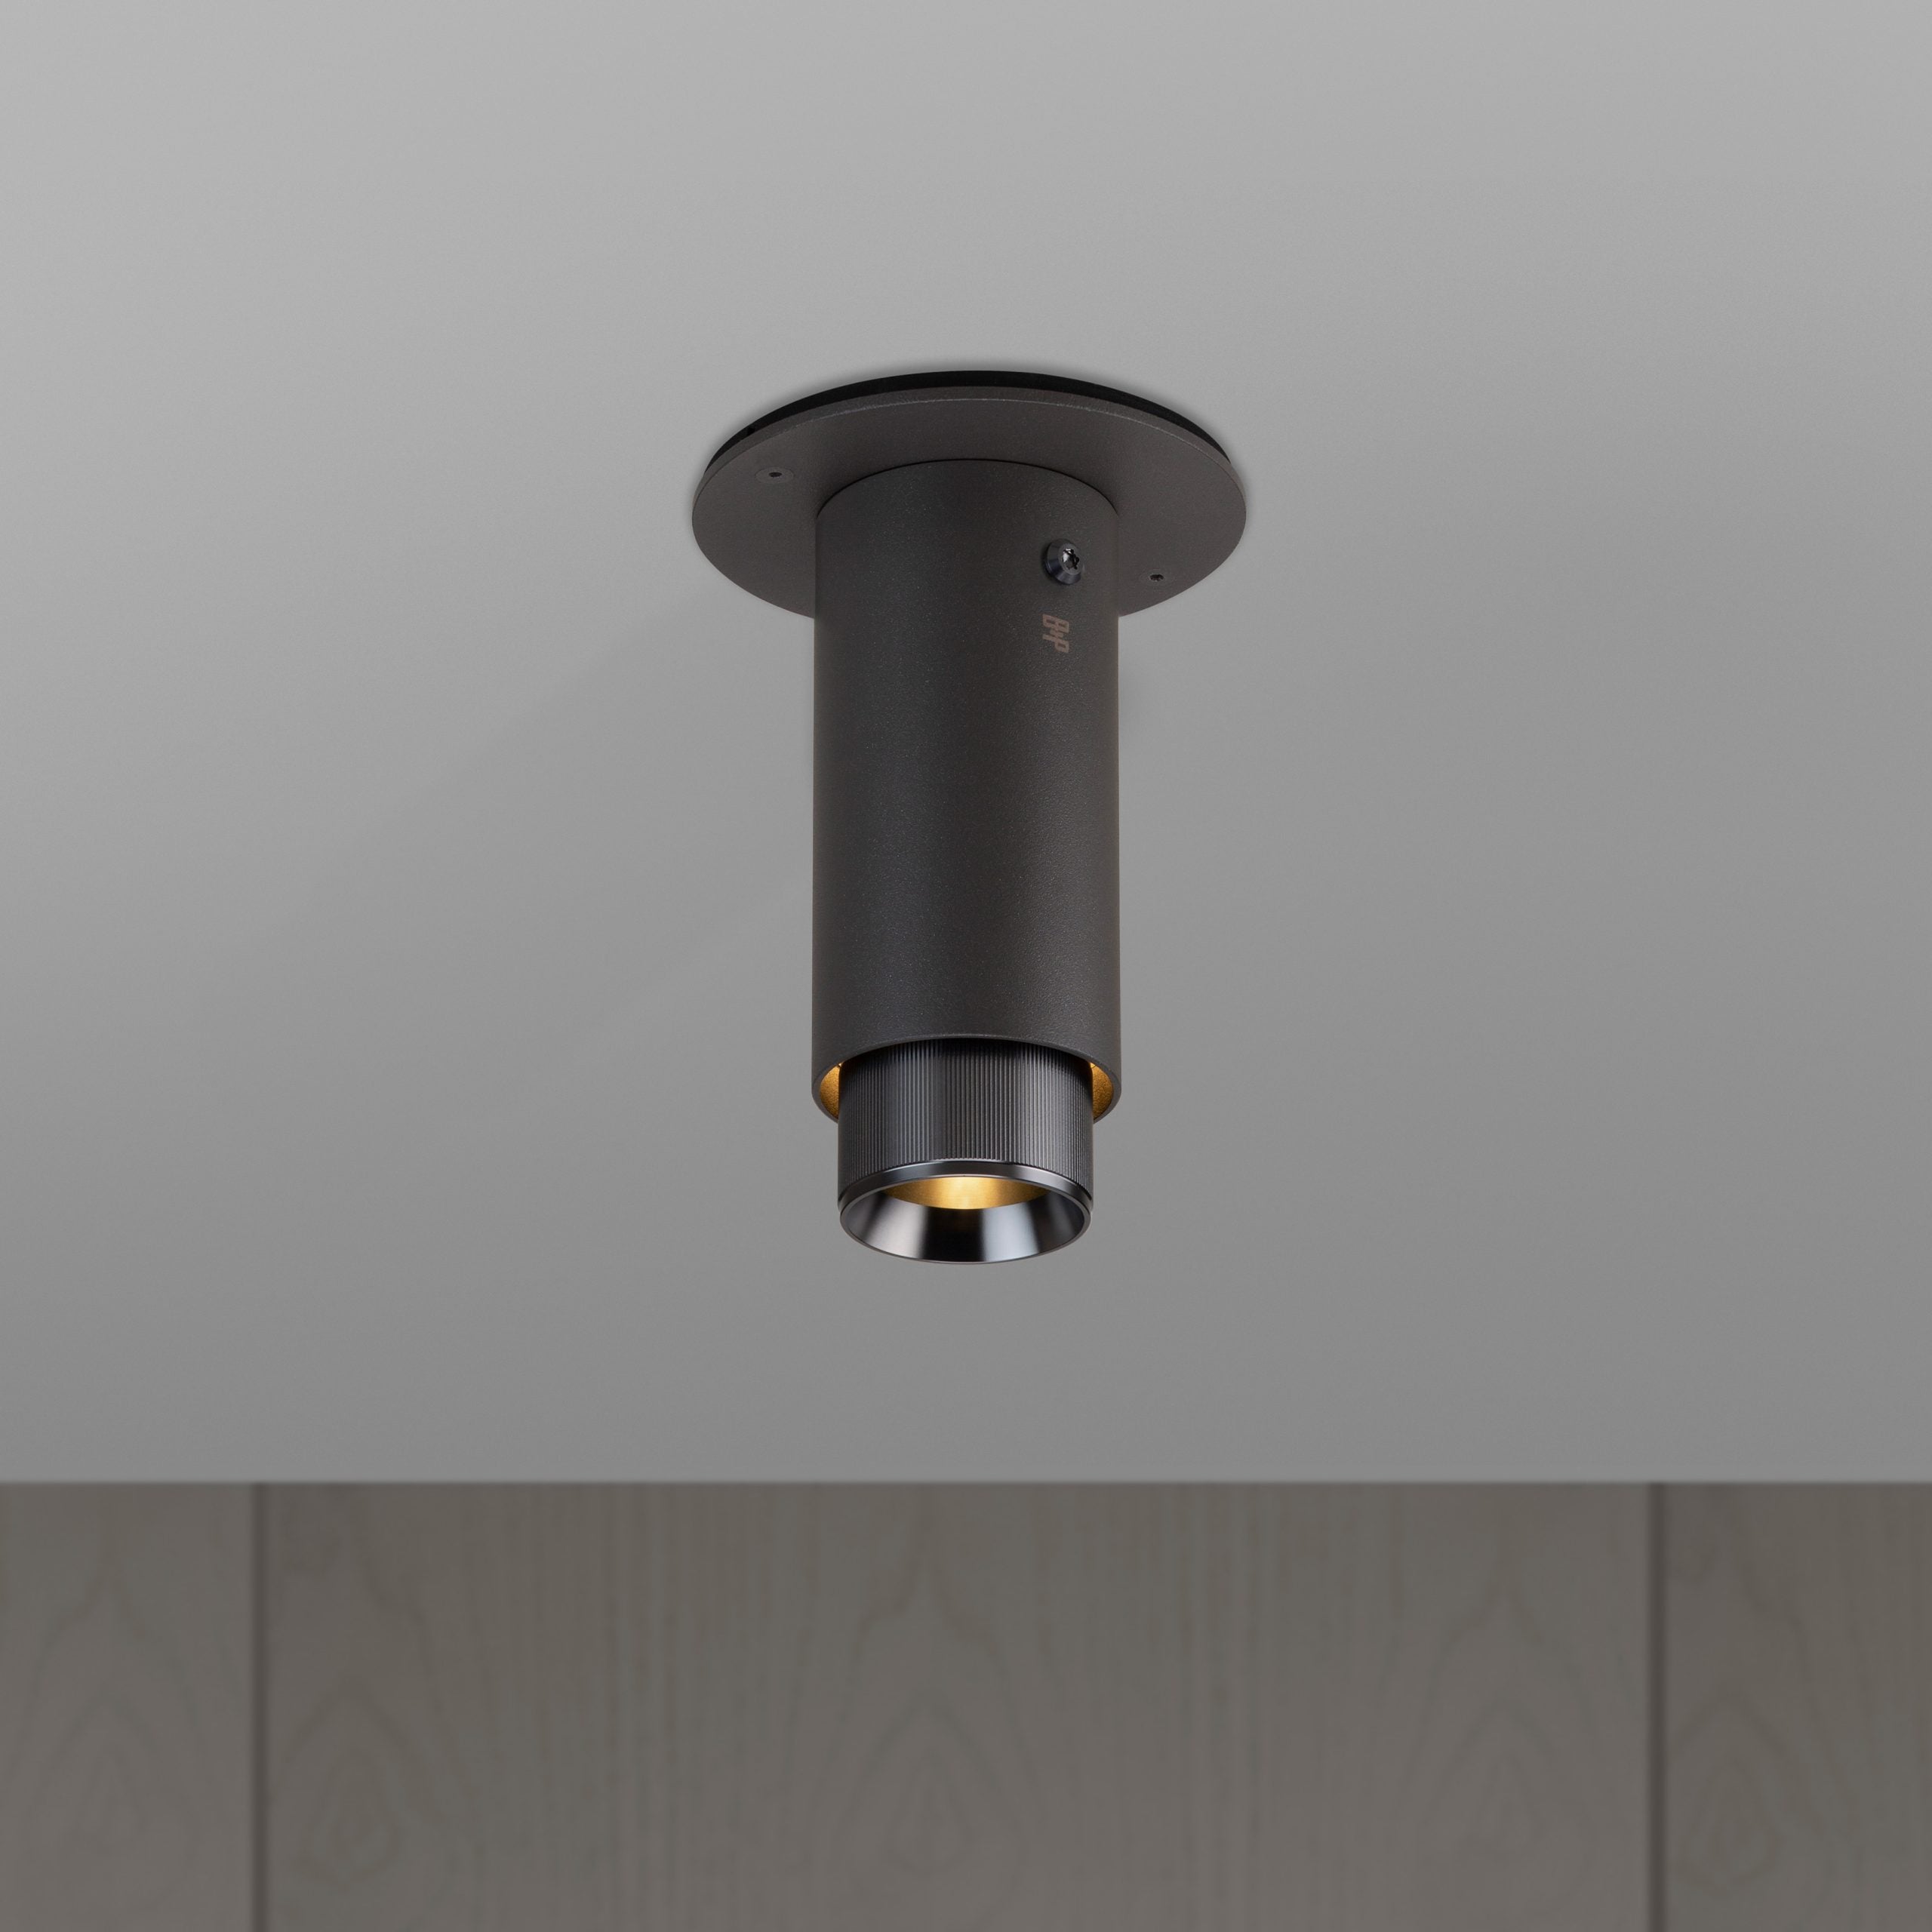 Buster + Punch Exhaust Surface Flush Mount Ceiling Light Buster + Punch Graphite & Gun Metal  